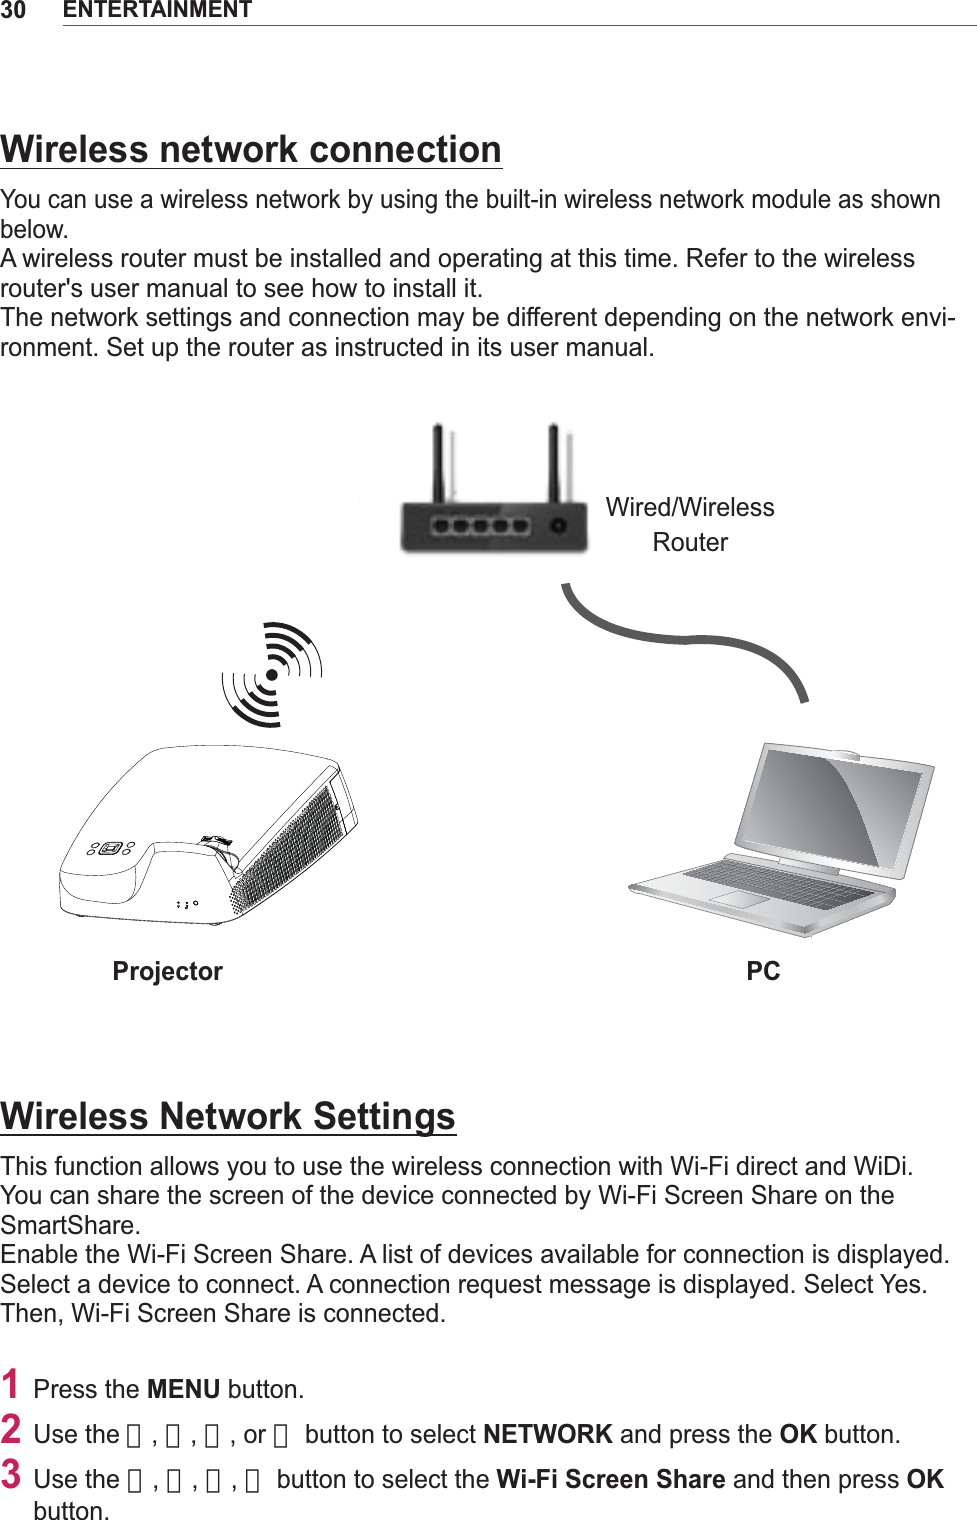 30ENTERTAINMENTWireless network connectionYou can use a wireless network by using the built-in wireless network module as shown below.A wireless router must be installed and operating at this time. Refer to the wireless router&apos;s user manual to see how to install it.The network settings and connection may be different depending on the network envi-ronment. Set up the router as instructed in its user manual.Wireless Network SettingsThis function allows you to use the wireless connection with Wi-Fi direct and WiDi. You can share the screen of the device connected by Wi-Fi Screen Share on the SmartShare. Enable the Wi-Fi Screen Share. A list of devices available for connection is displayed. Select a device to connect. A connection request message is displayed. Select Yes.  Then, Wi-Fi Screen Share is connected.1 Press the MENU button.2 Use the 󱛨, 󱛩, 󱛦, or 󱛧 button to select NETWORK and press the OK button.3 Use the 󱛨, 󱛩, 󱛦, 󱛧 button to select the Wi-Fi Screen Share and then press OK button.Wired/Wireless RouterPCProjector